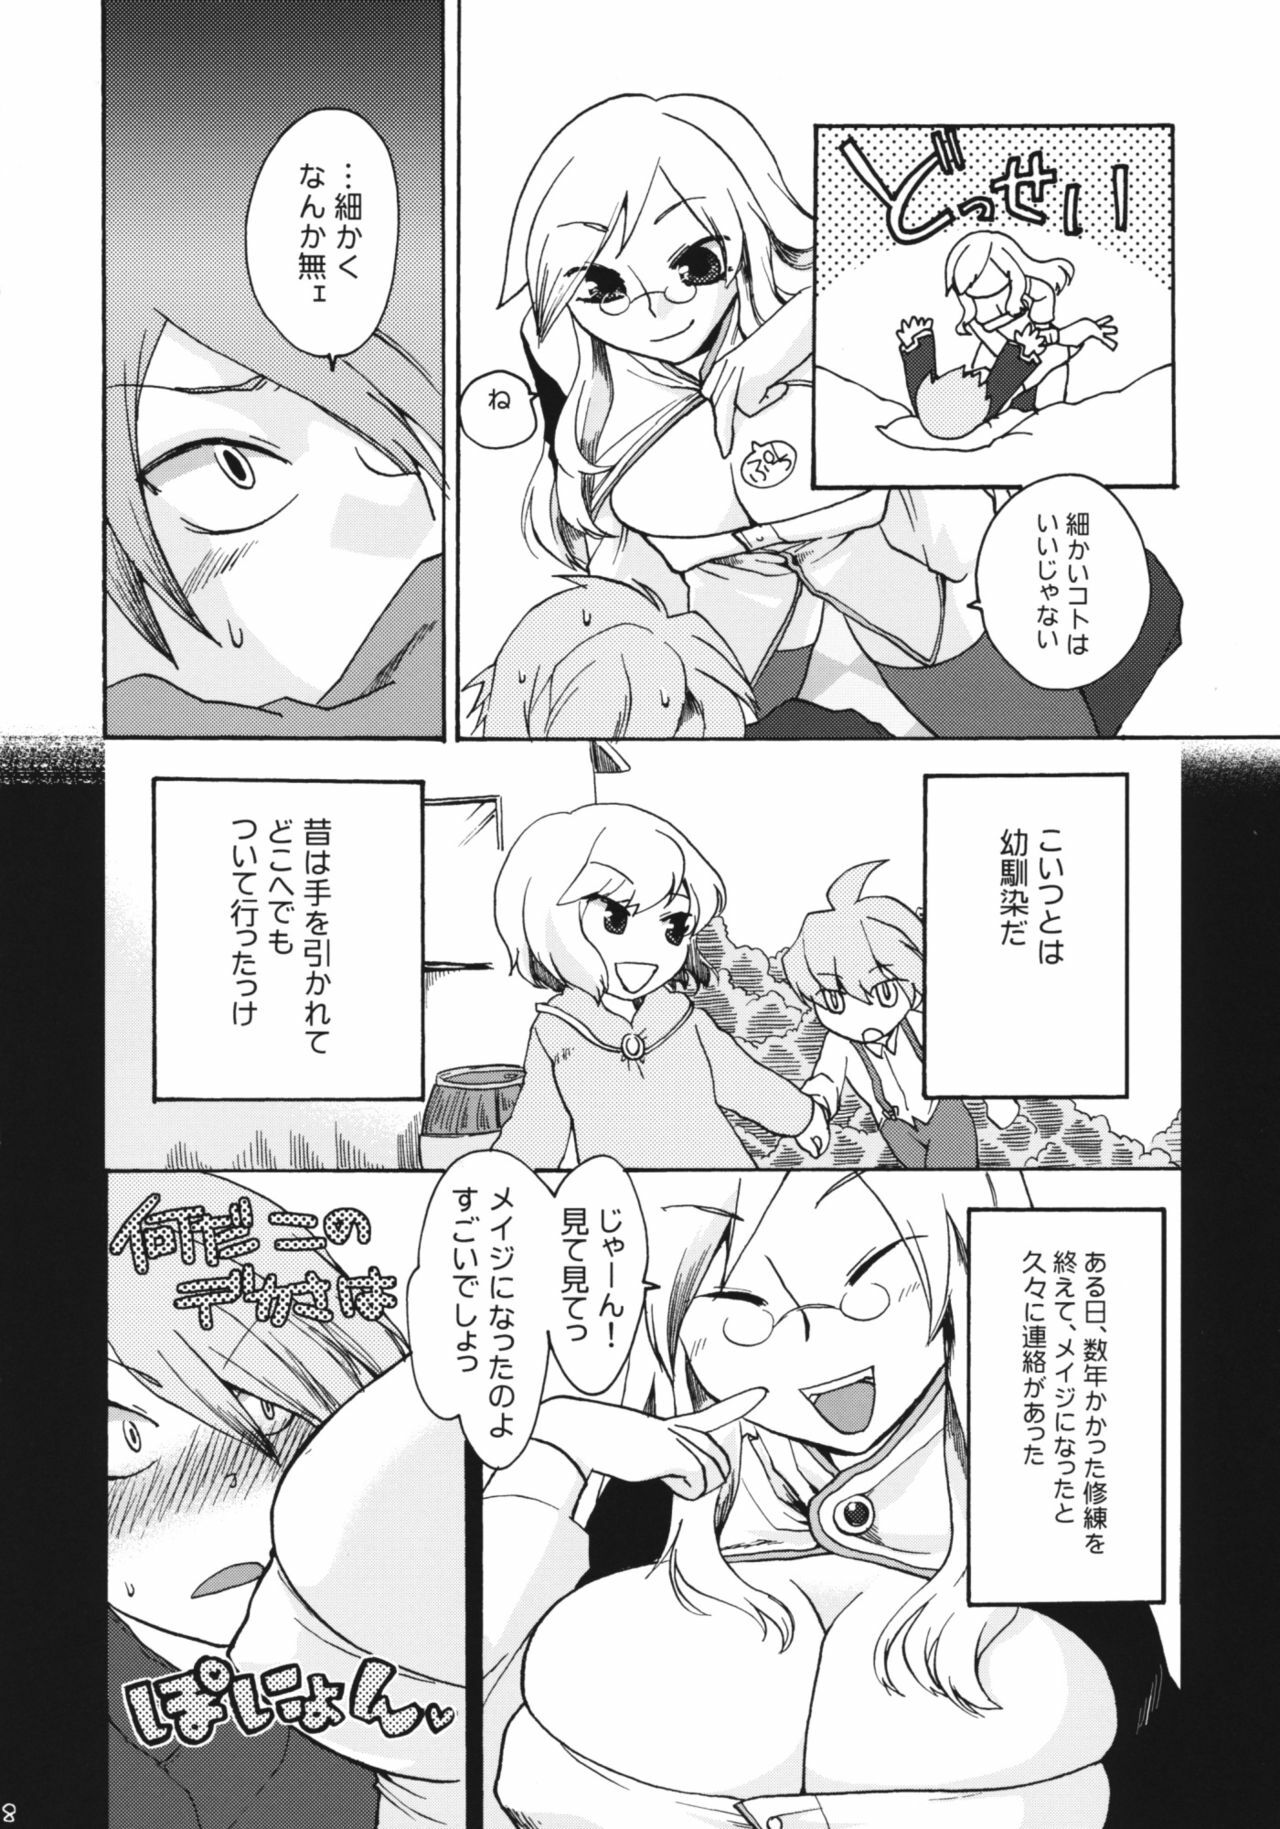 (ComiComi13) [Trip Spider (niwacho)] In You And Me (7th DRAGON) page 7 full